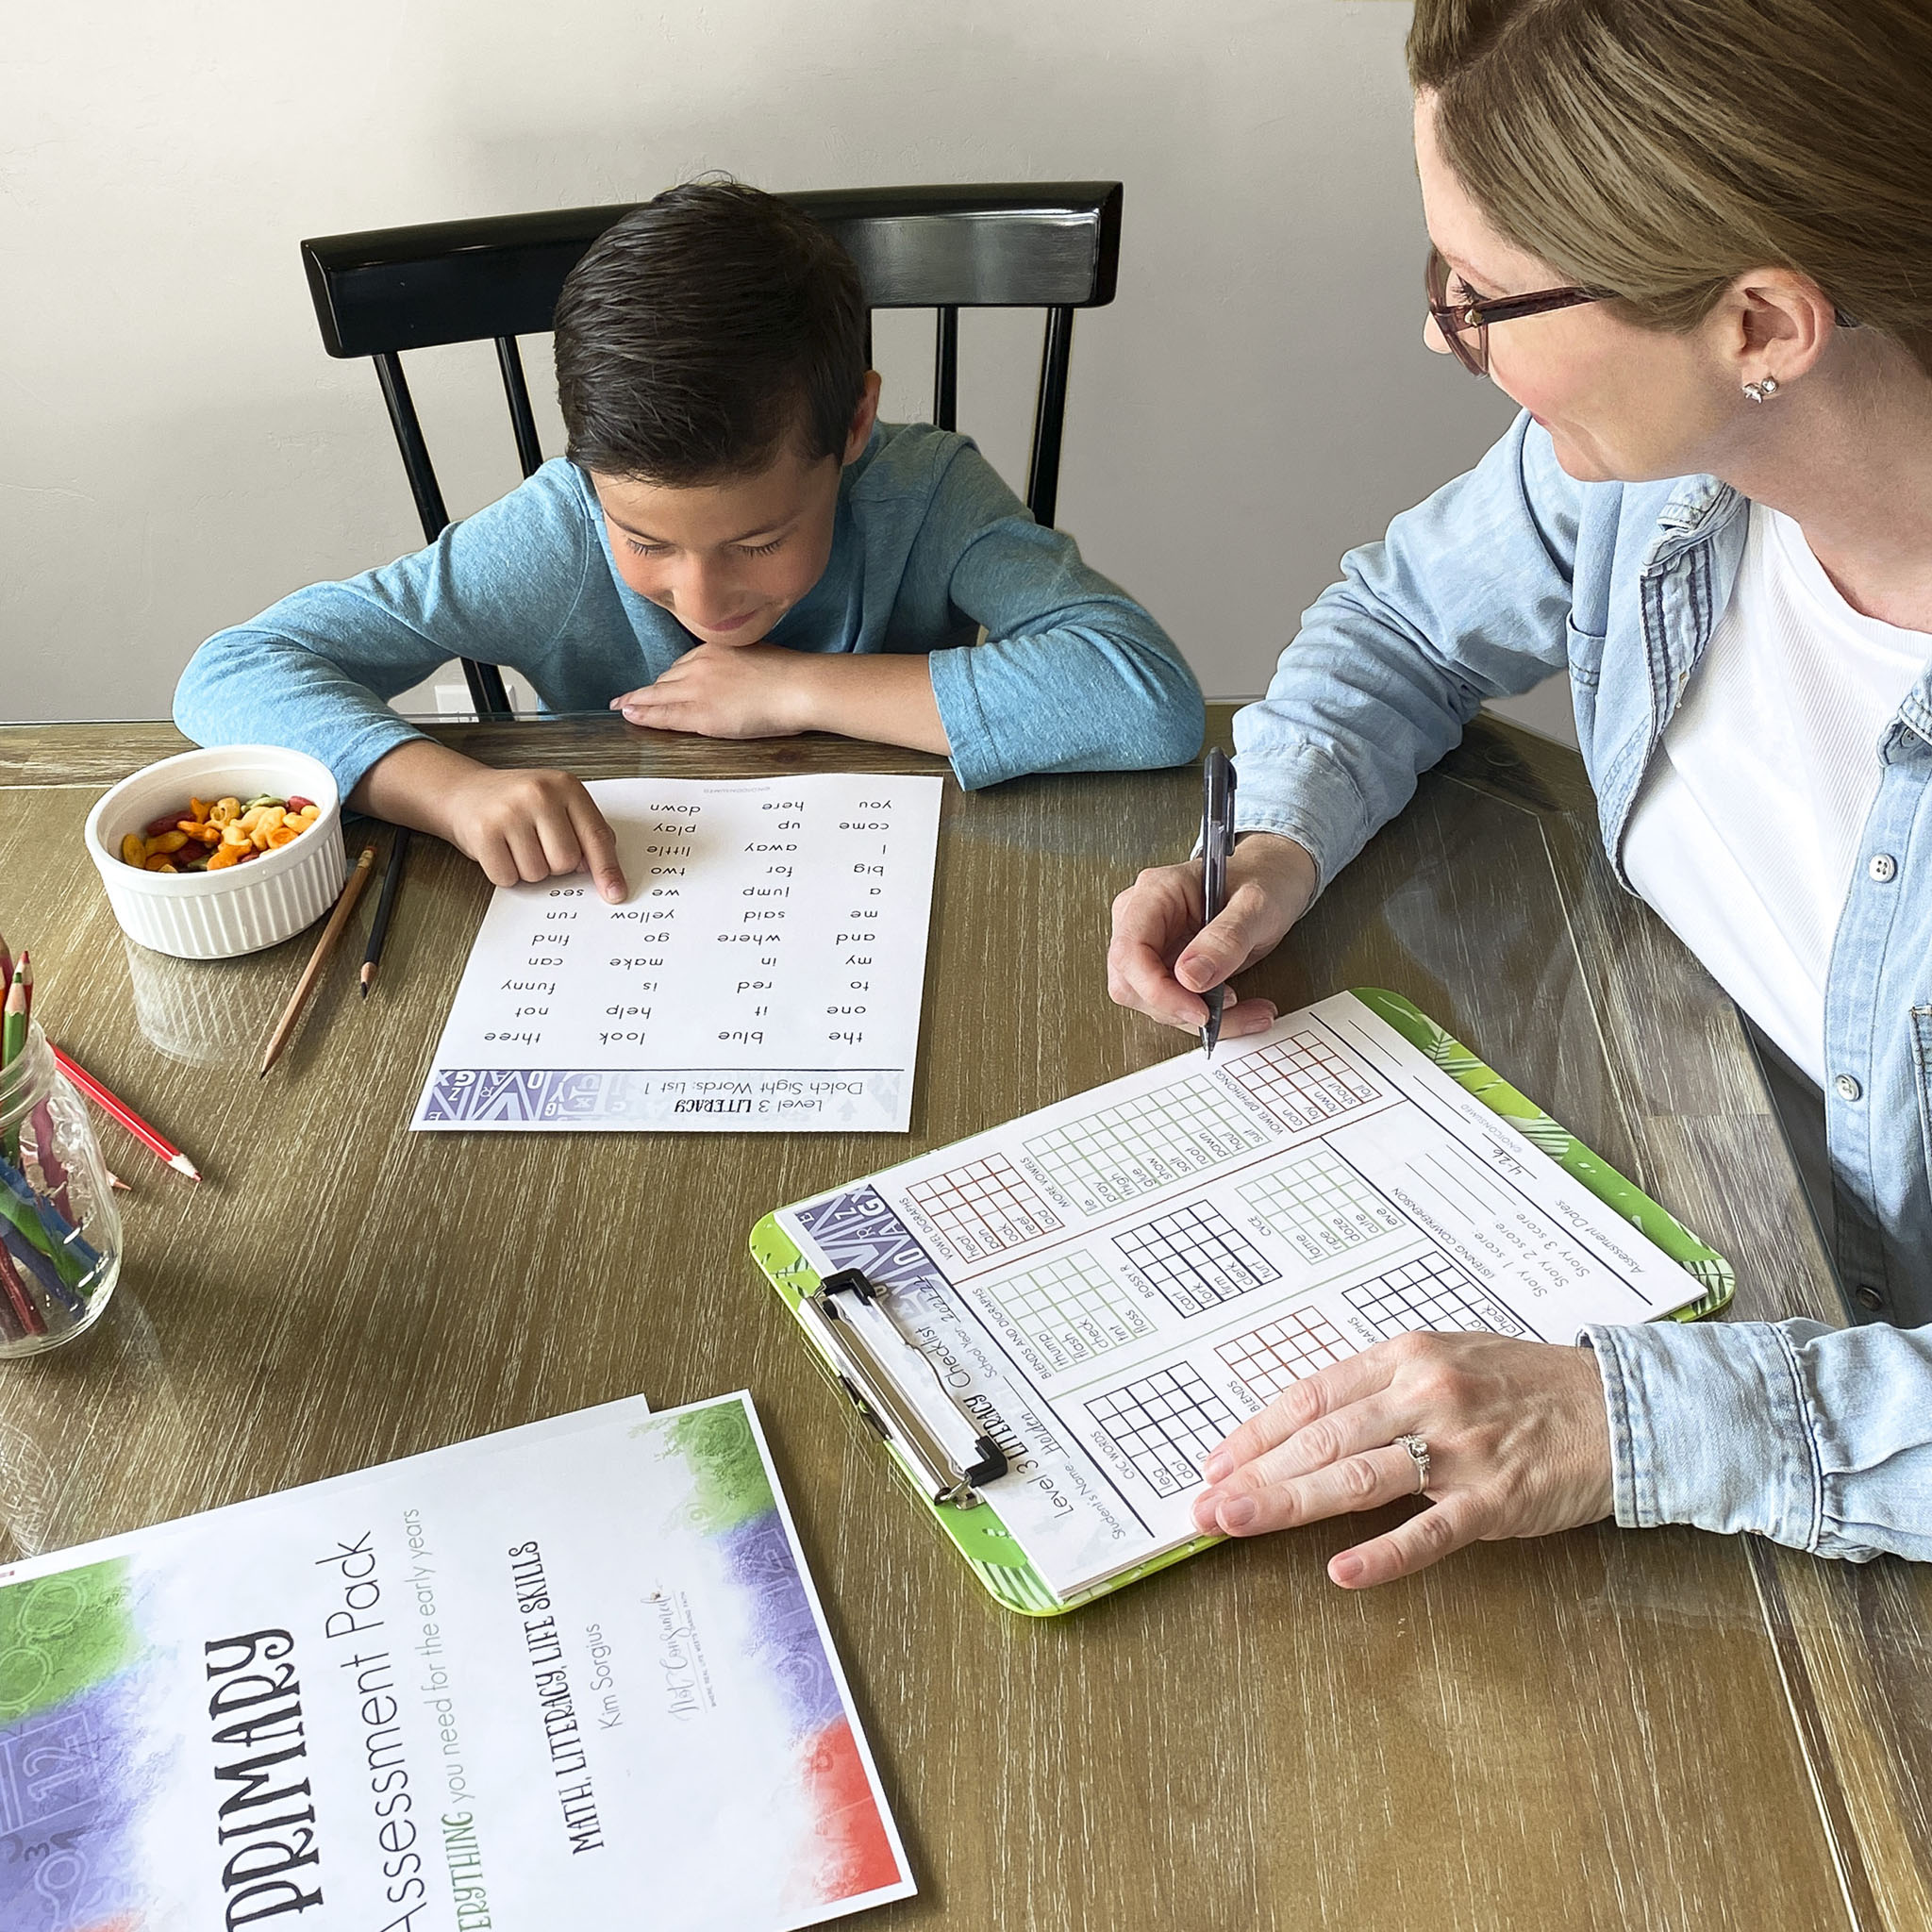 A Simple Plan for Homeschool Assessment by Grade Level